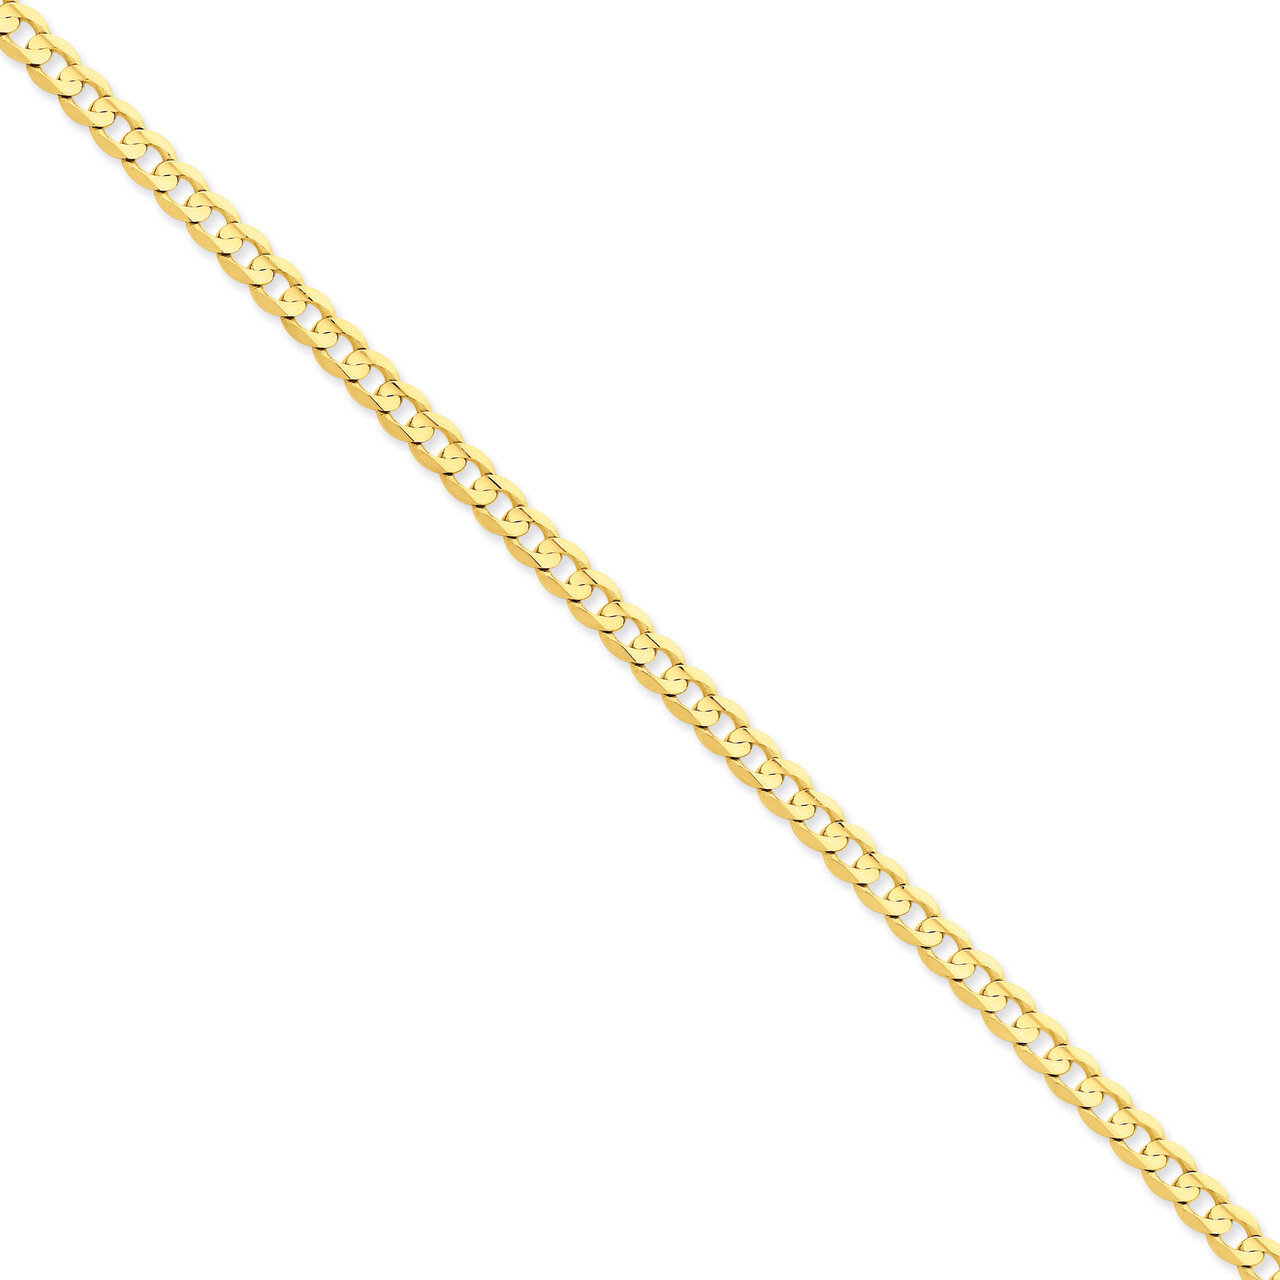 5.25mm Open Concave Curb Chain 18 Inch 14k Gold LCR140-18